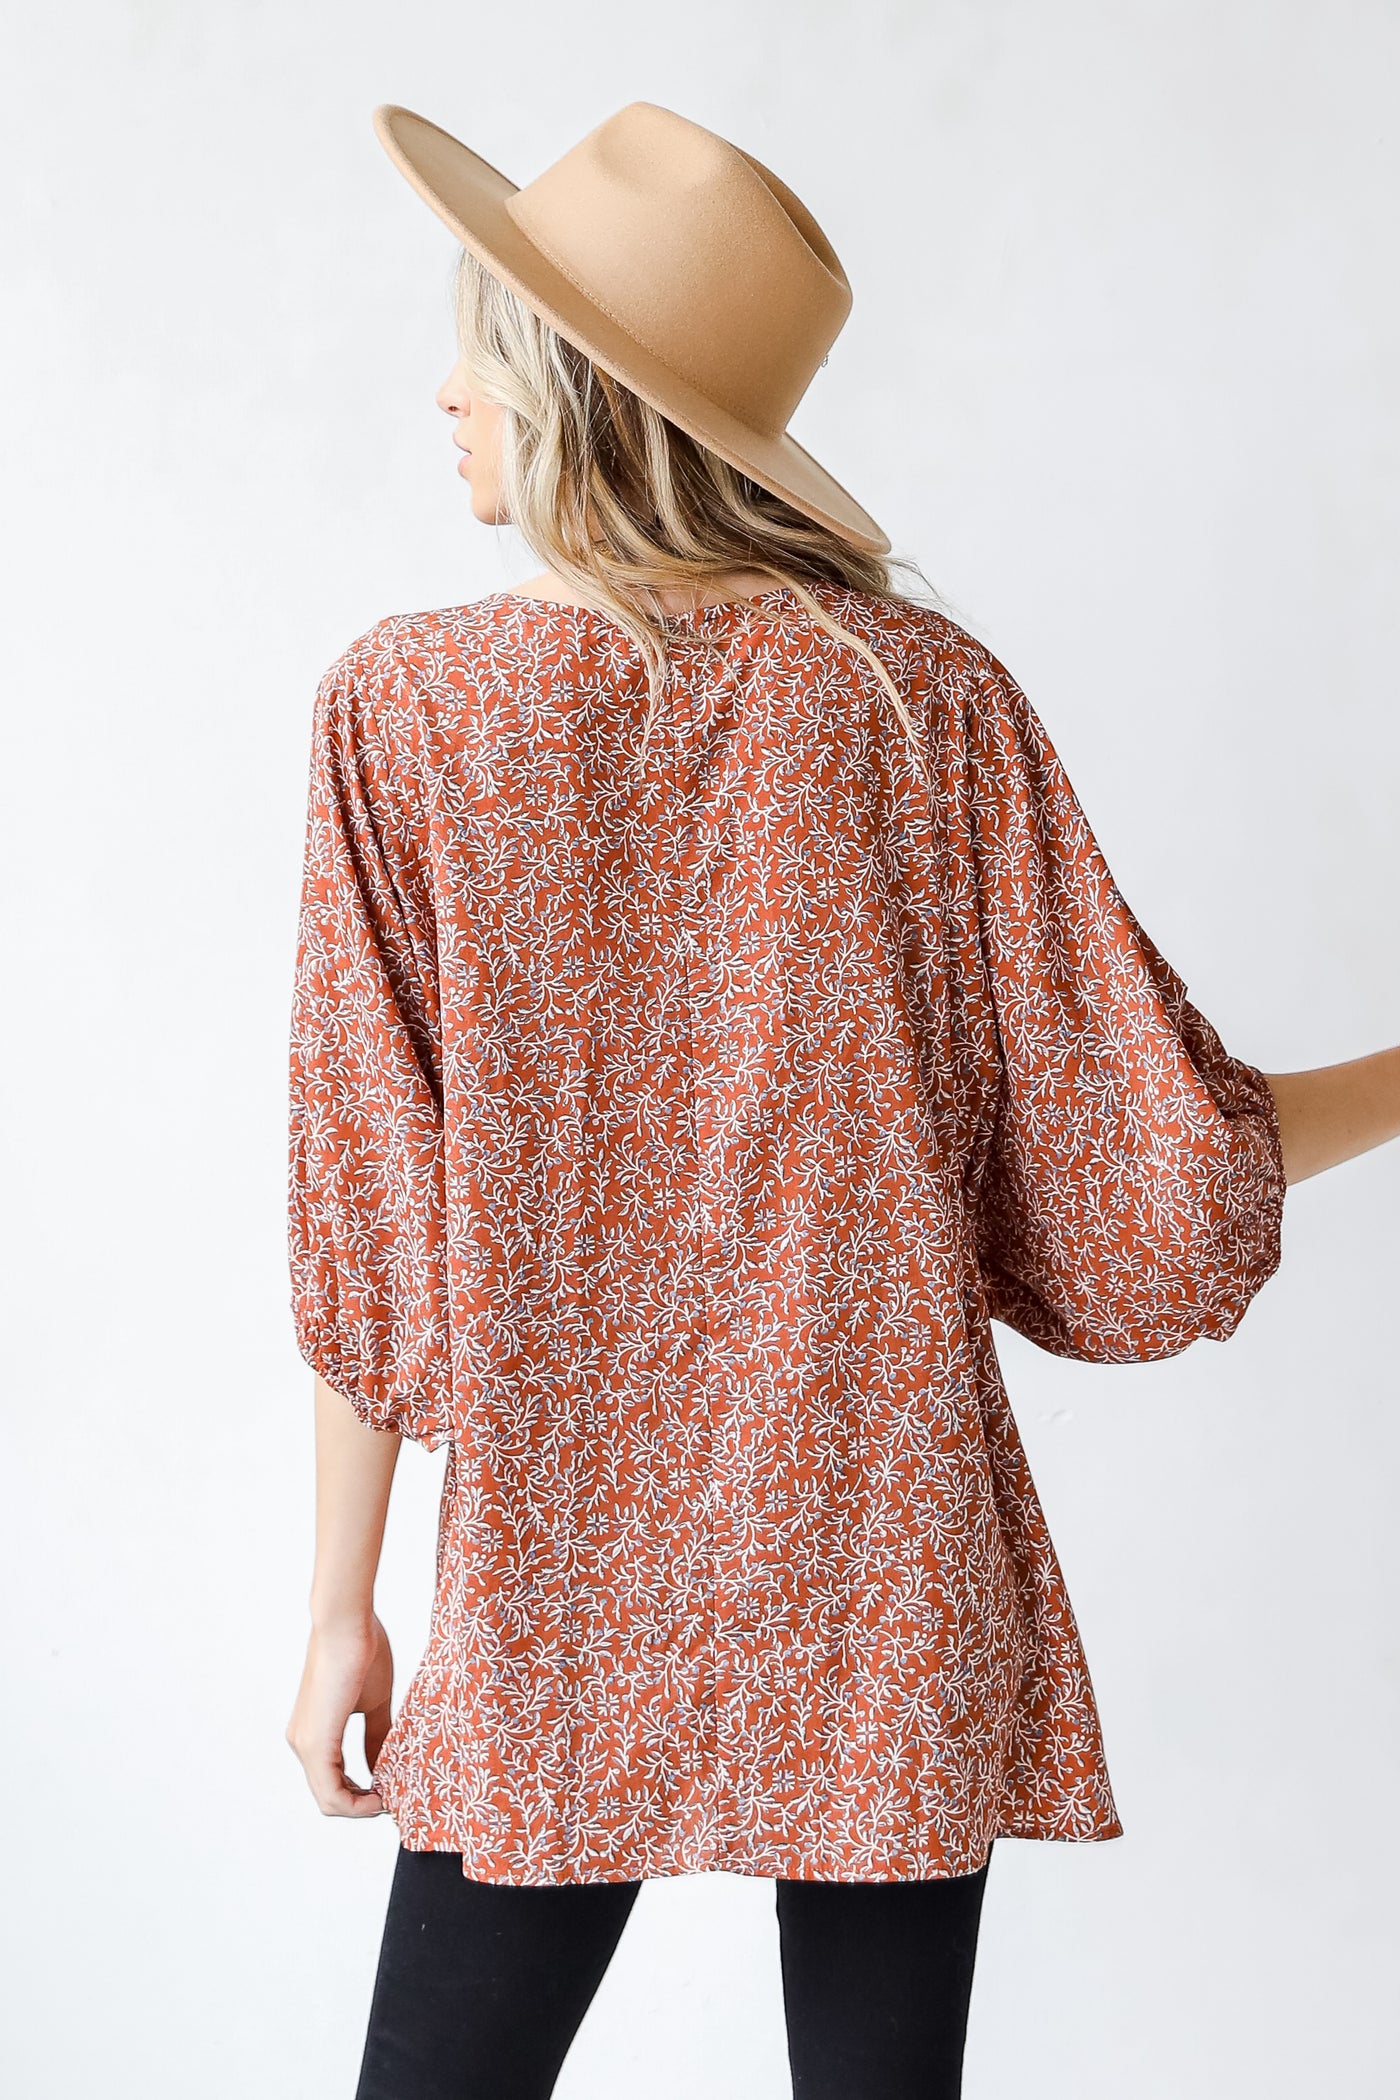 Floral Tunic back view